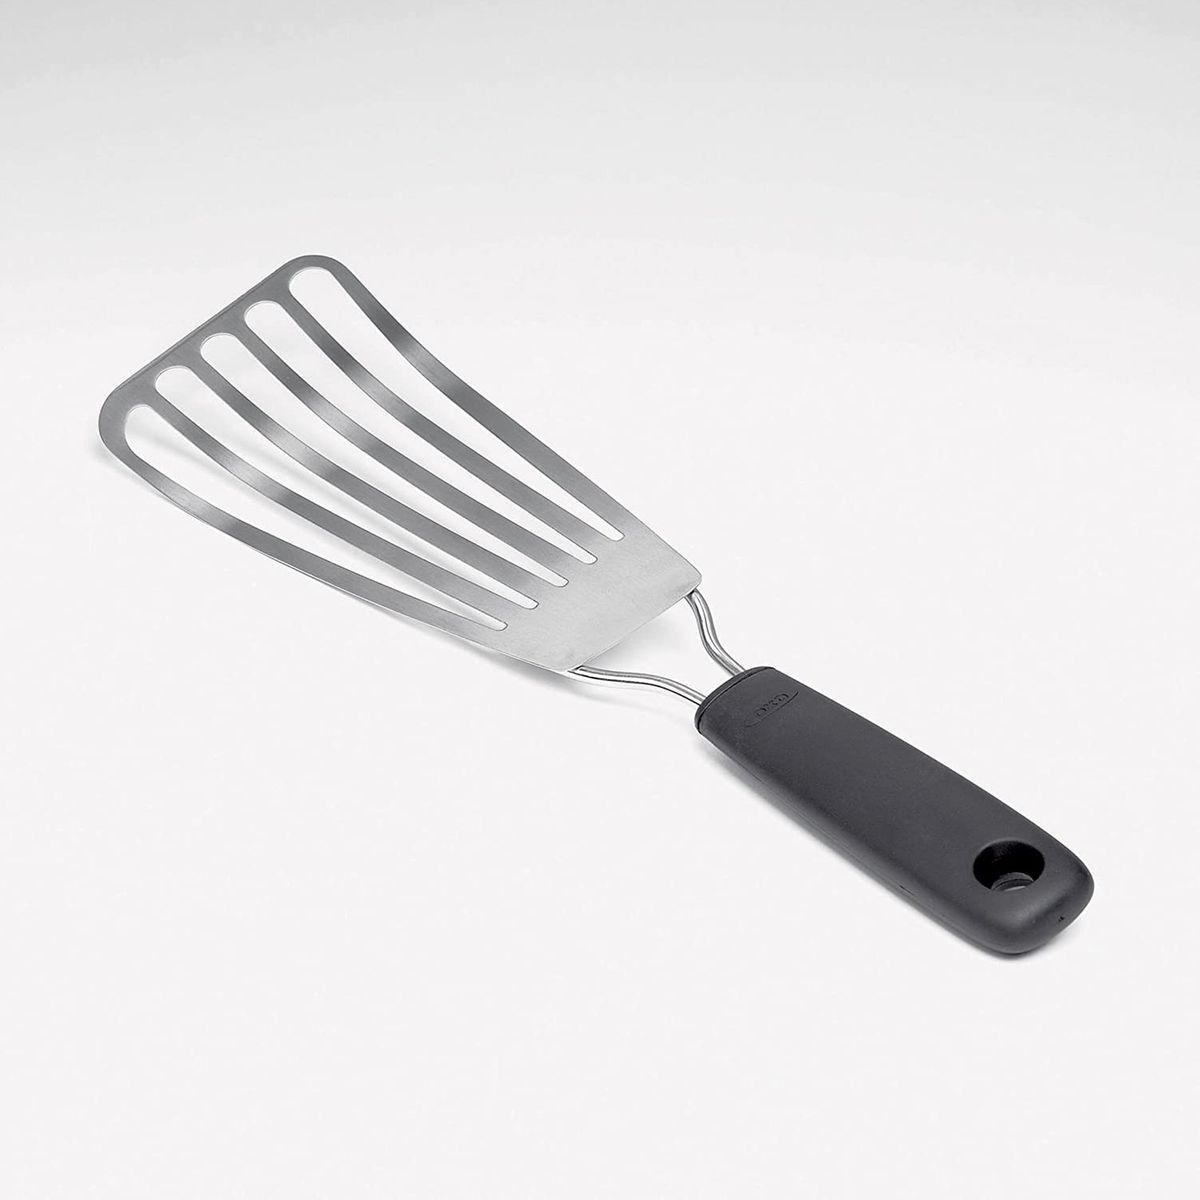 An OXO stainless steel fish turner